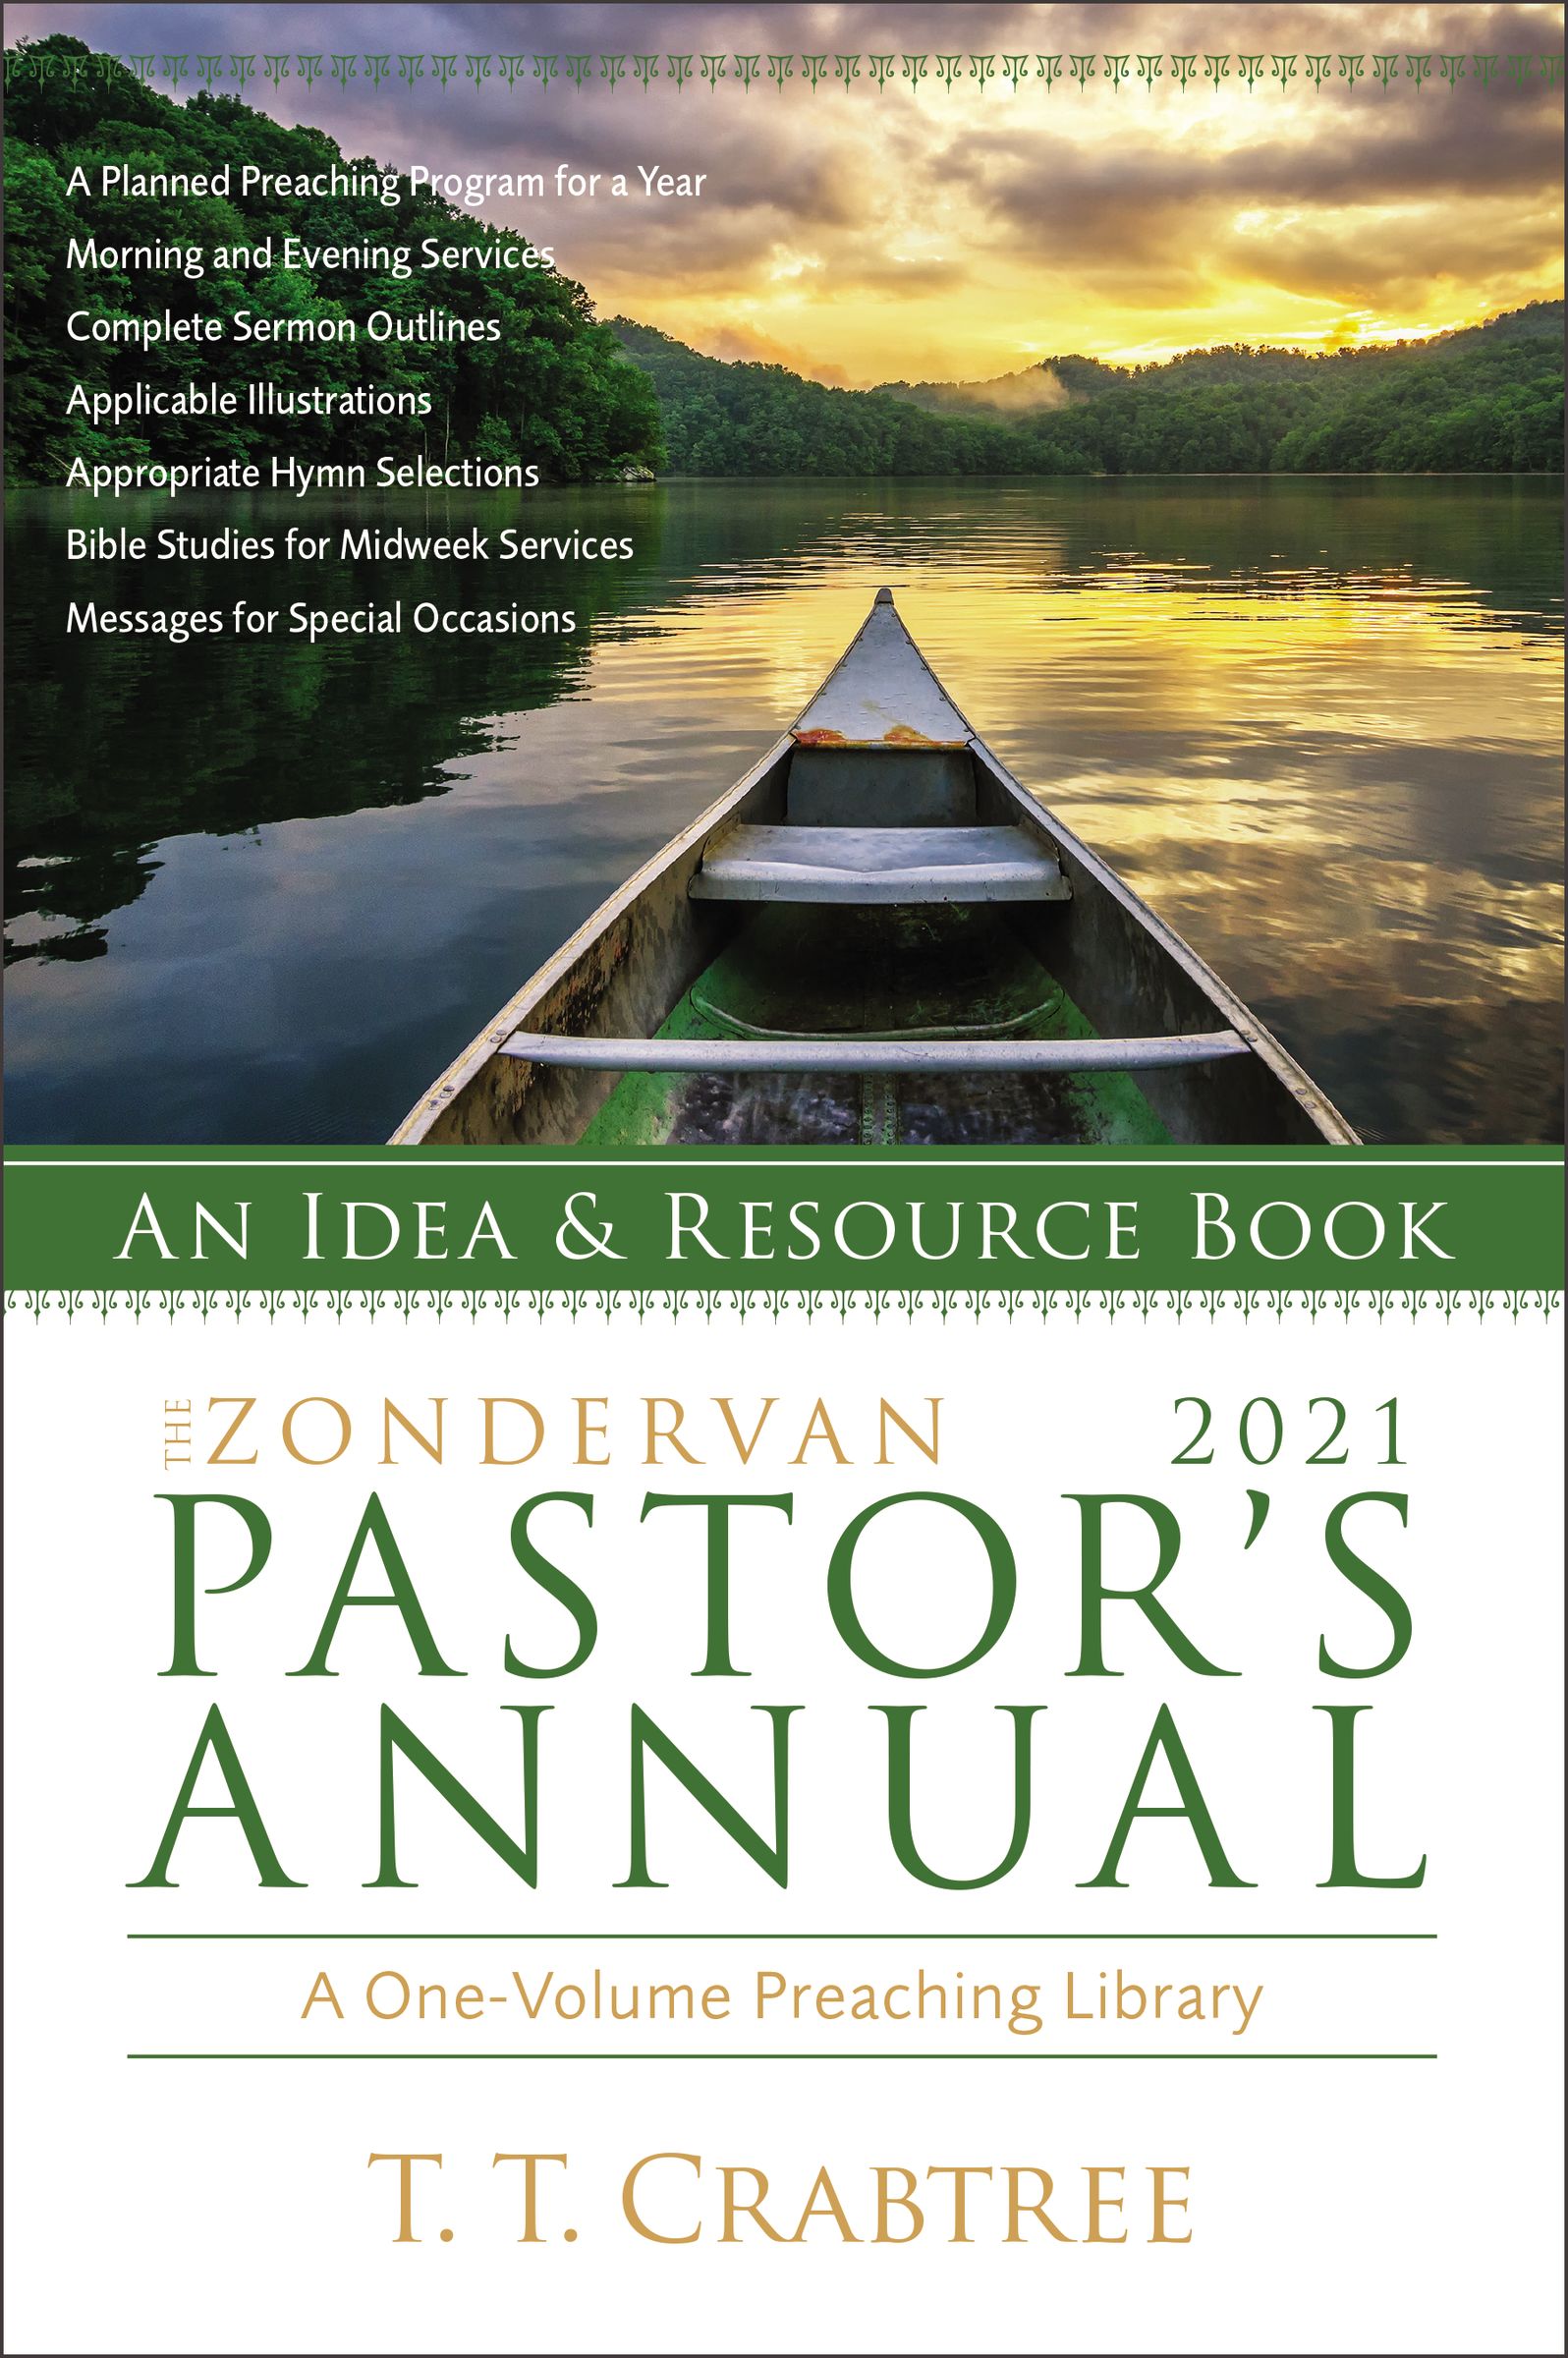 Image of The Zondervan 2021 Pastor's Annual other